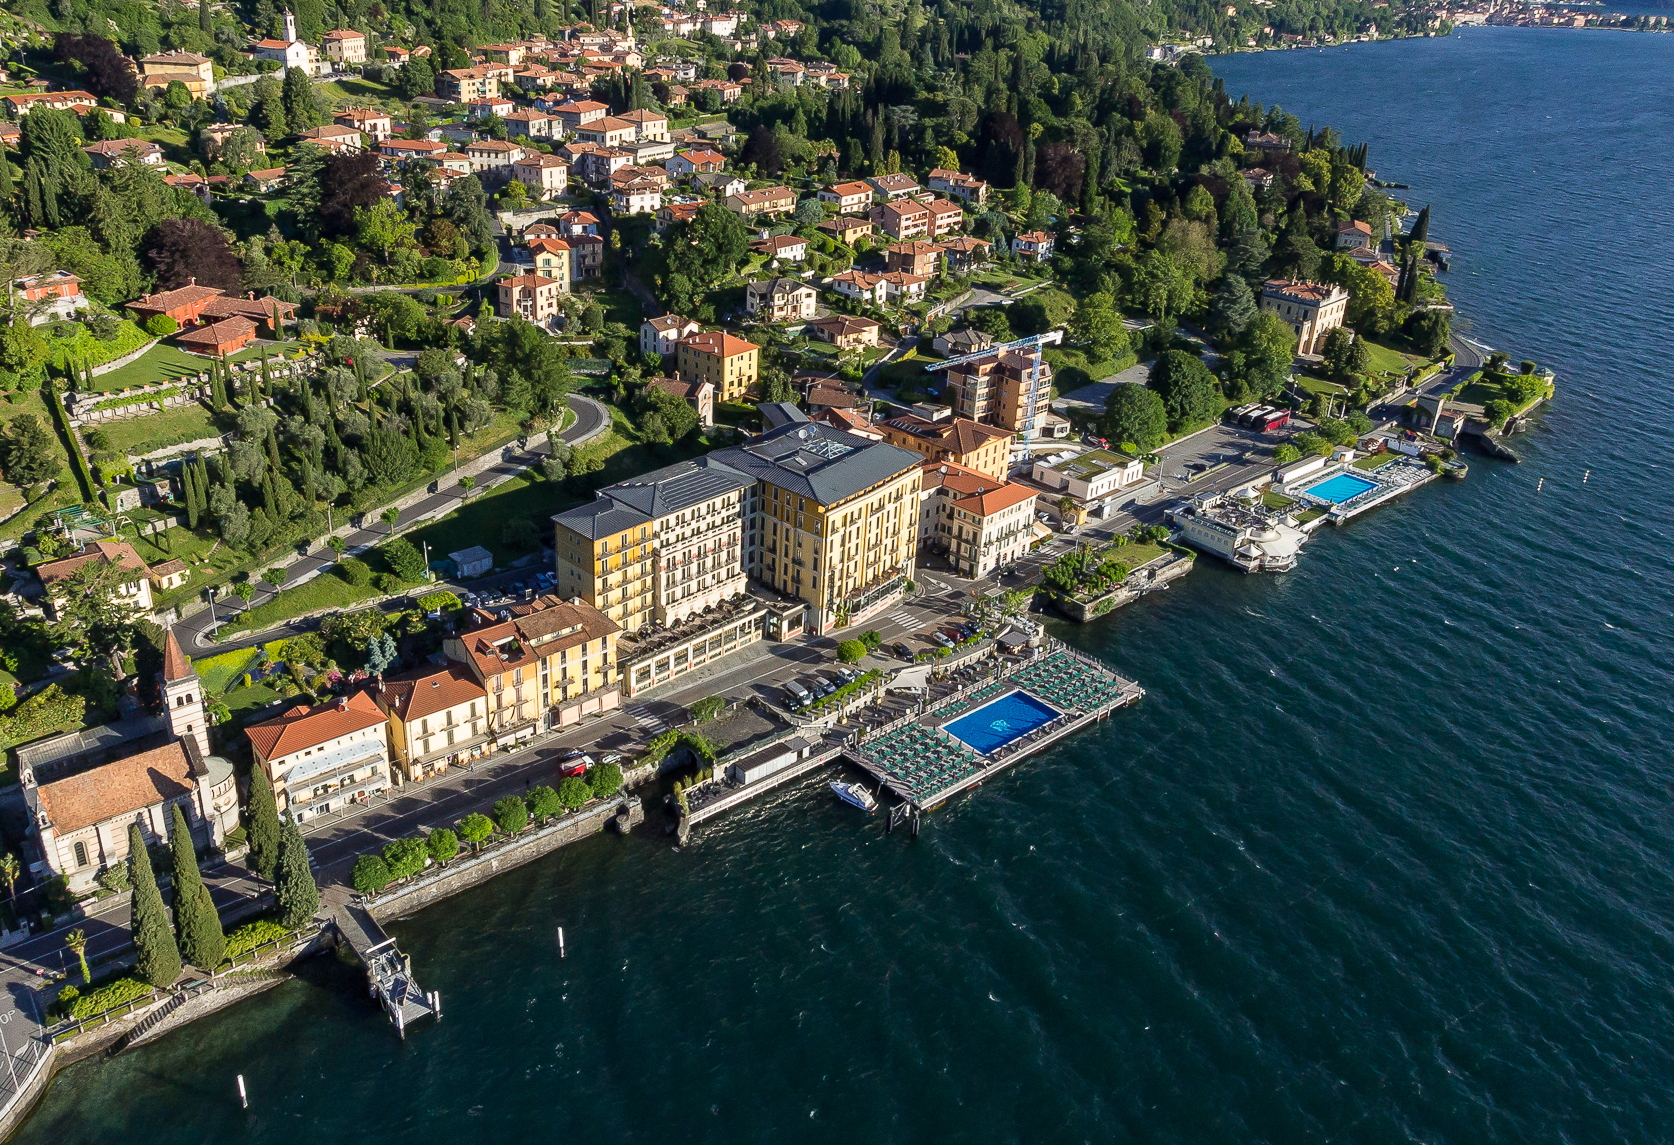 The Lake Como Edition is expected to open in 2025. Click to enlarge.